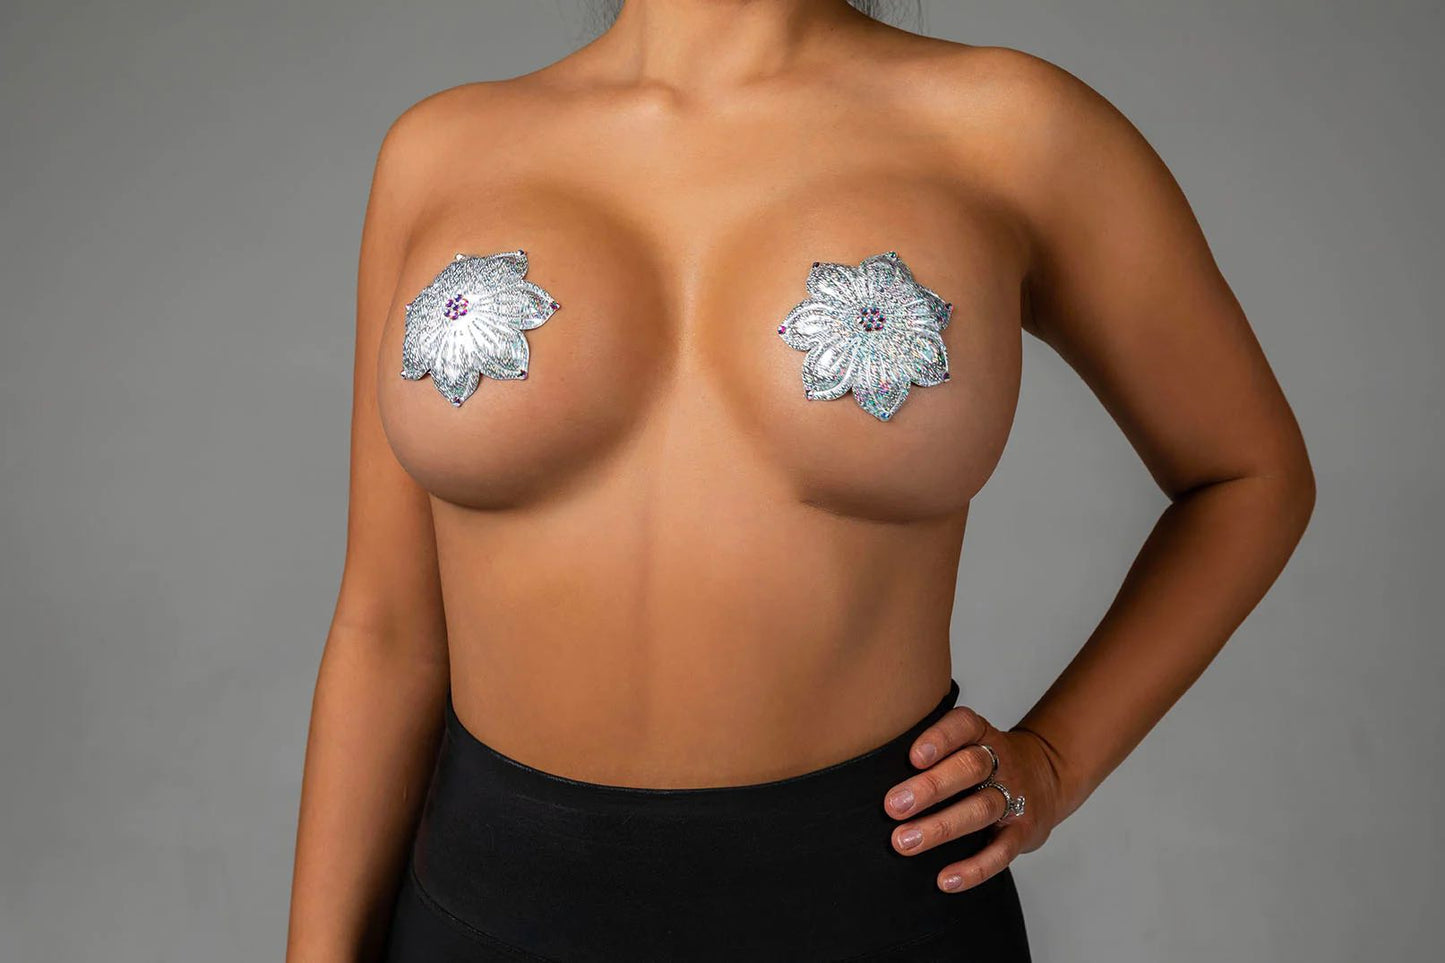 A model wearing the Silver Iridescent Speckle Miami Deluxe Reusable Pasties by Blissidy.